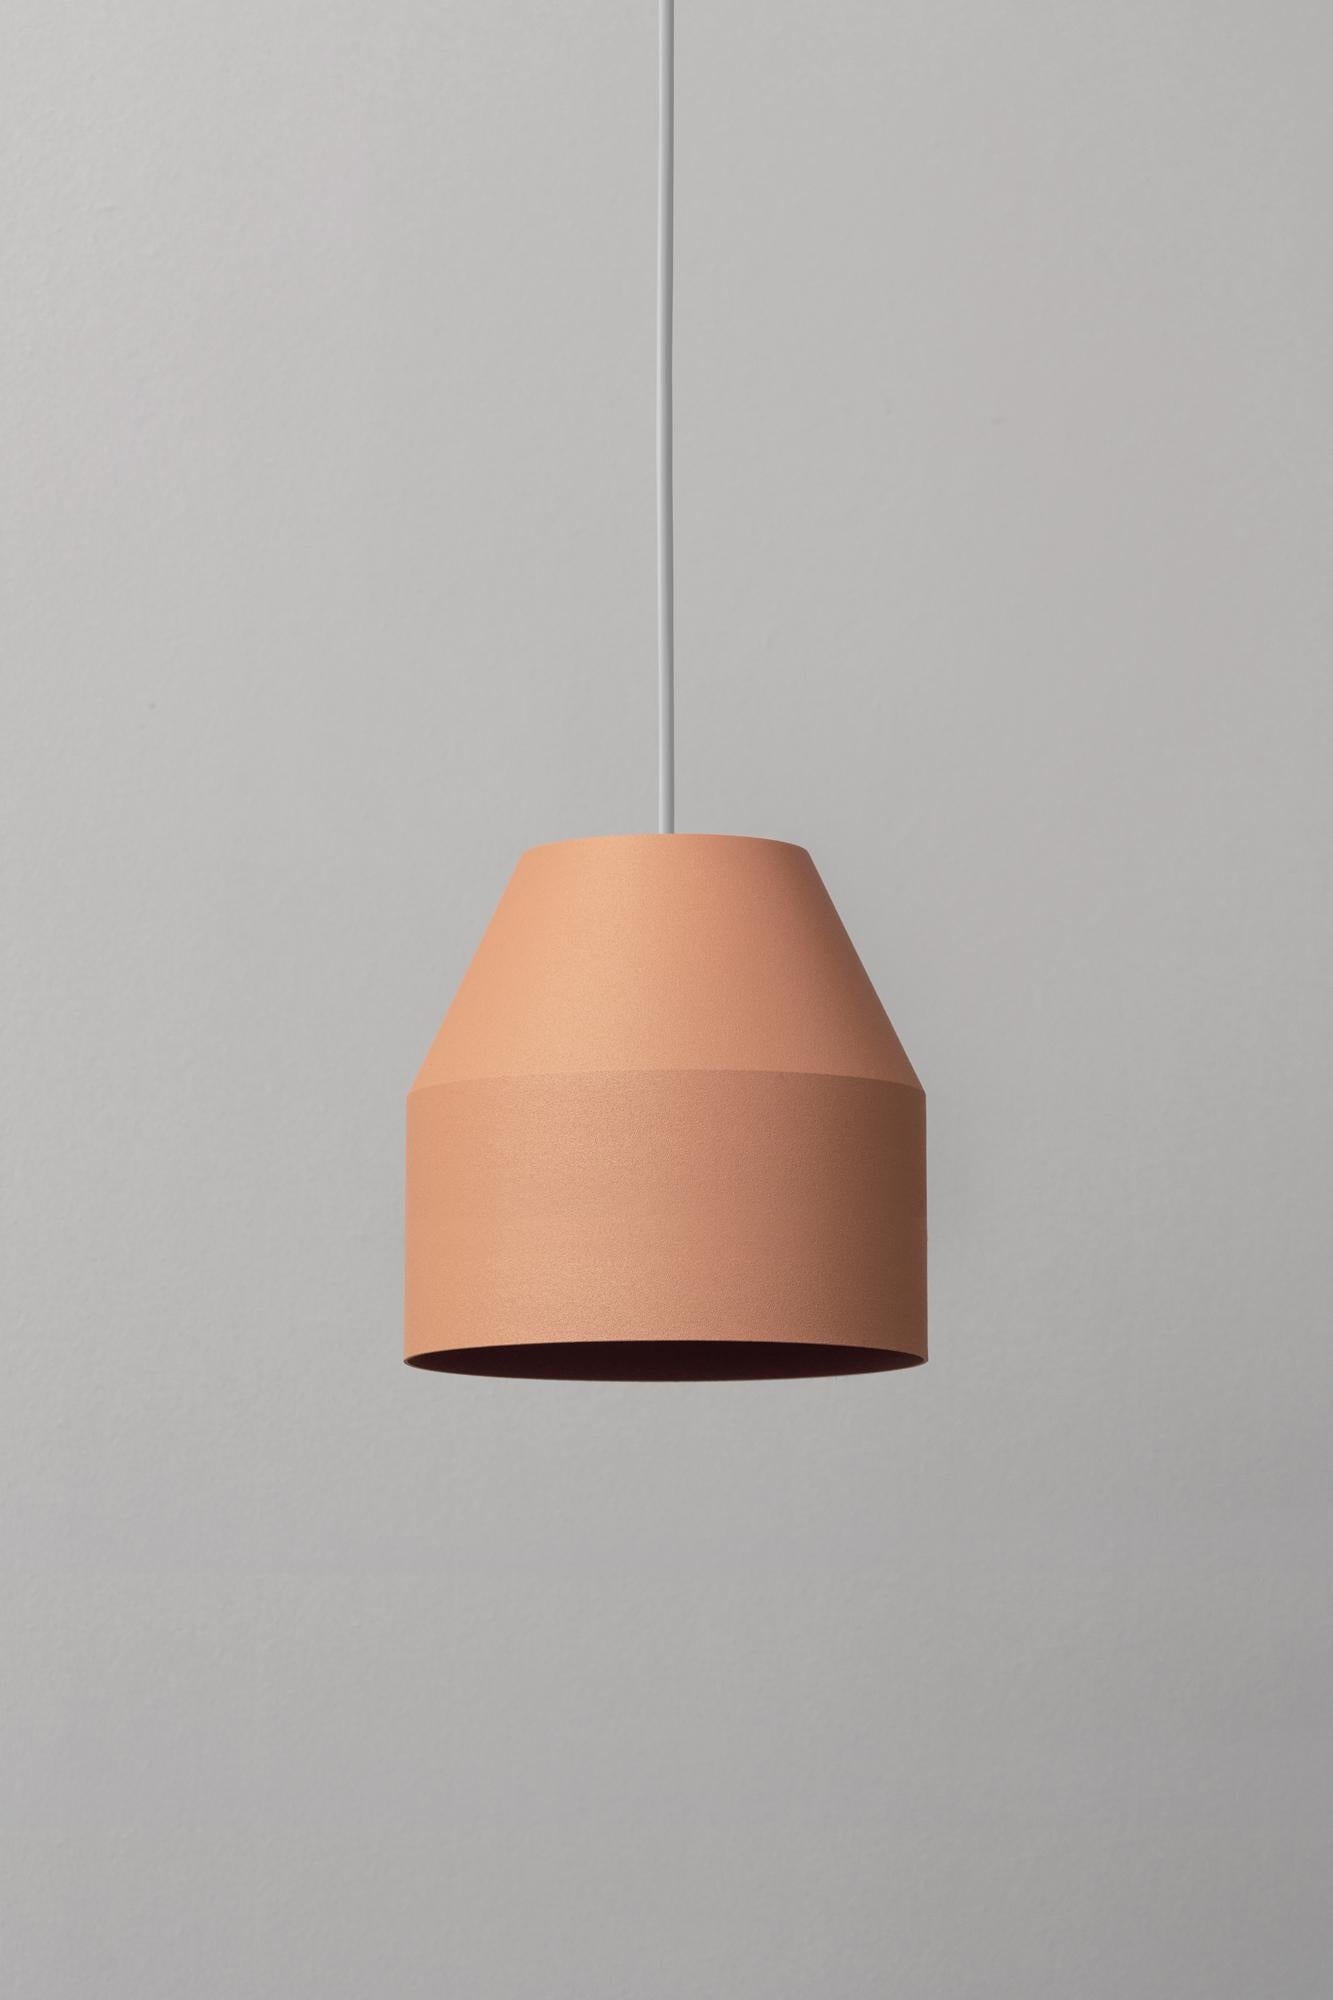 Big Coral Cap Pendant Lamp by +kouple
Dimensions: Ø 16 x H 16,5 cm. 
Materials: Powder-coated steel.

Available in different color options. Available in two different sizes. The rod length is 200 cm. Please contact us.

All our lamps can be wired